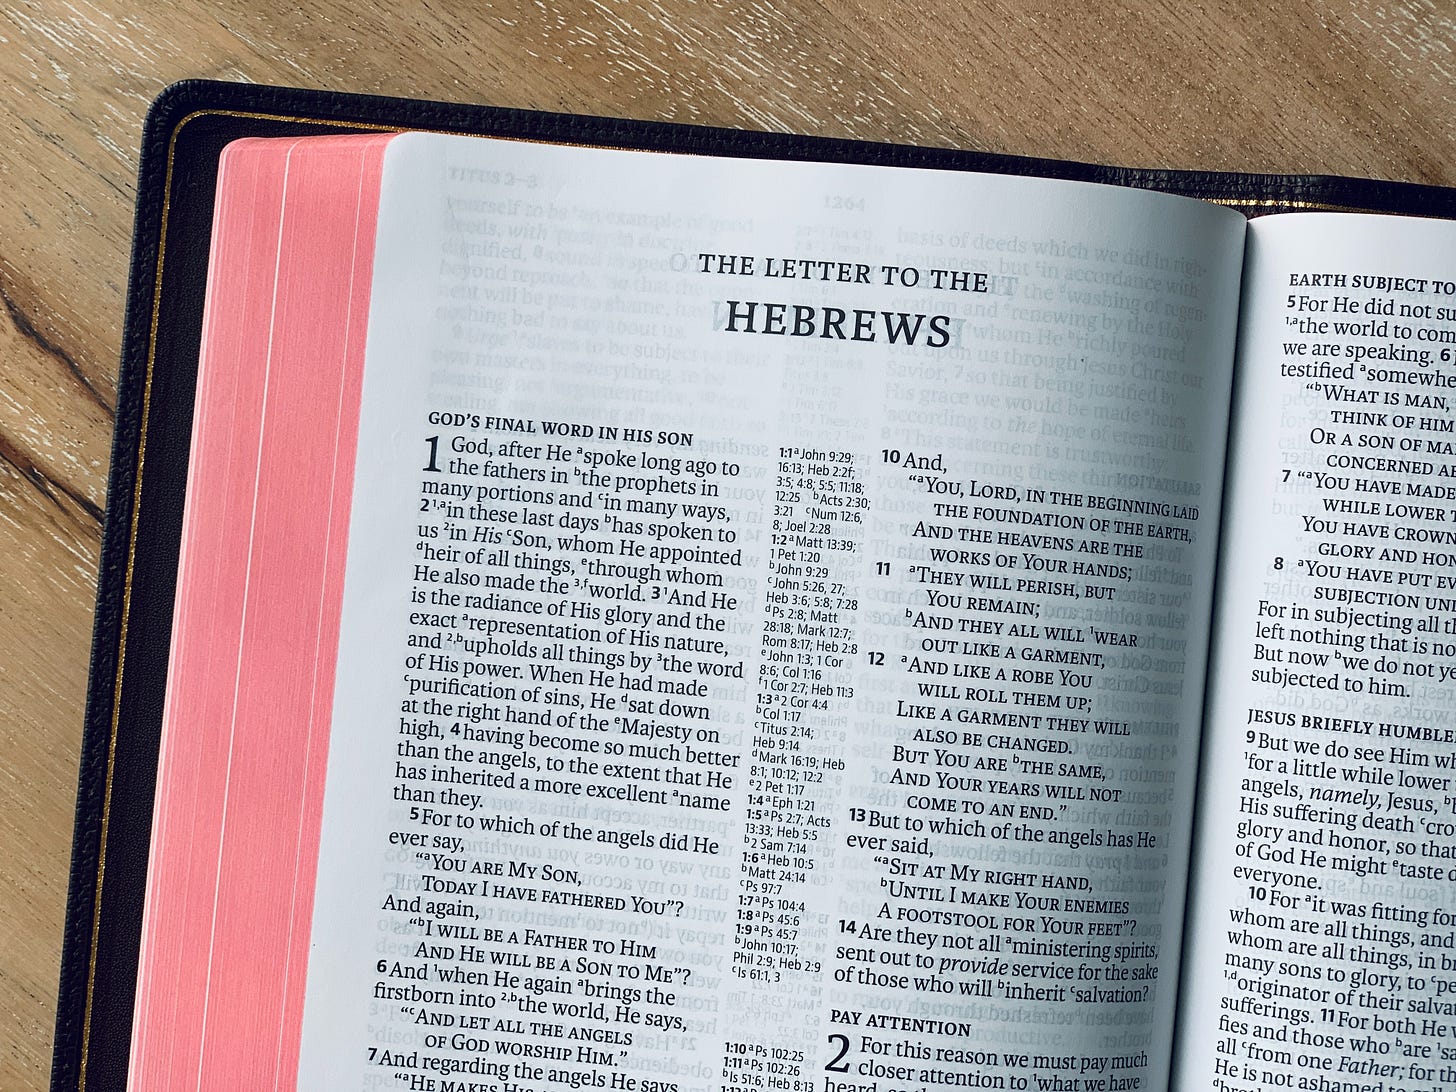 Bible open to the book of Hebrewws